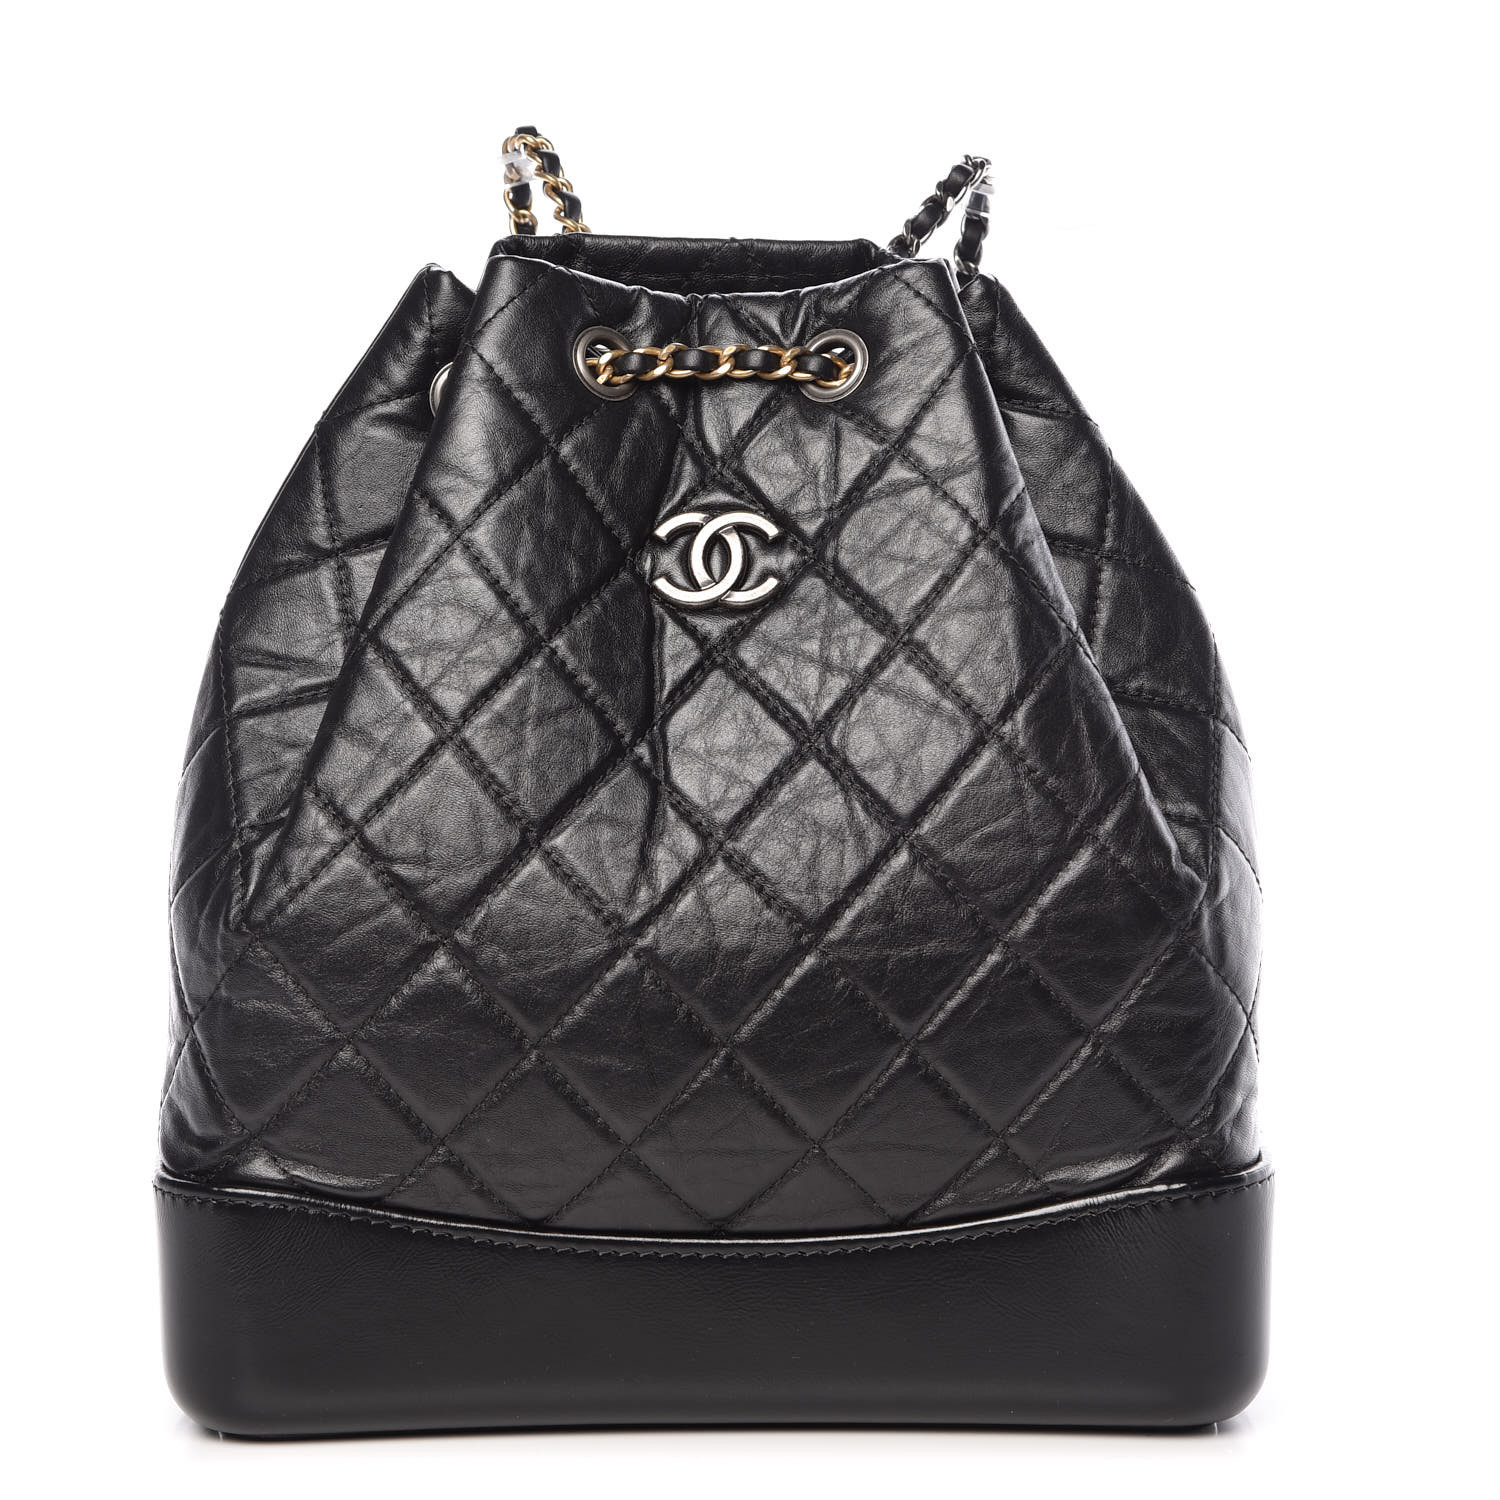 CHANEL Aged Calfskin Quilted Gabrielle Backpack Black 389860 | FASHIONPHILE